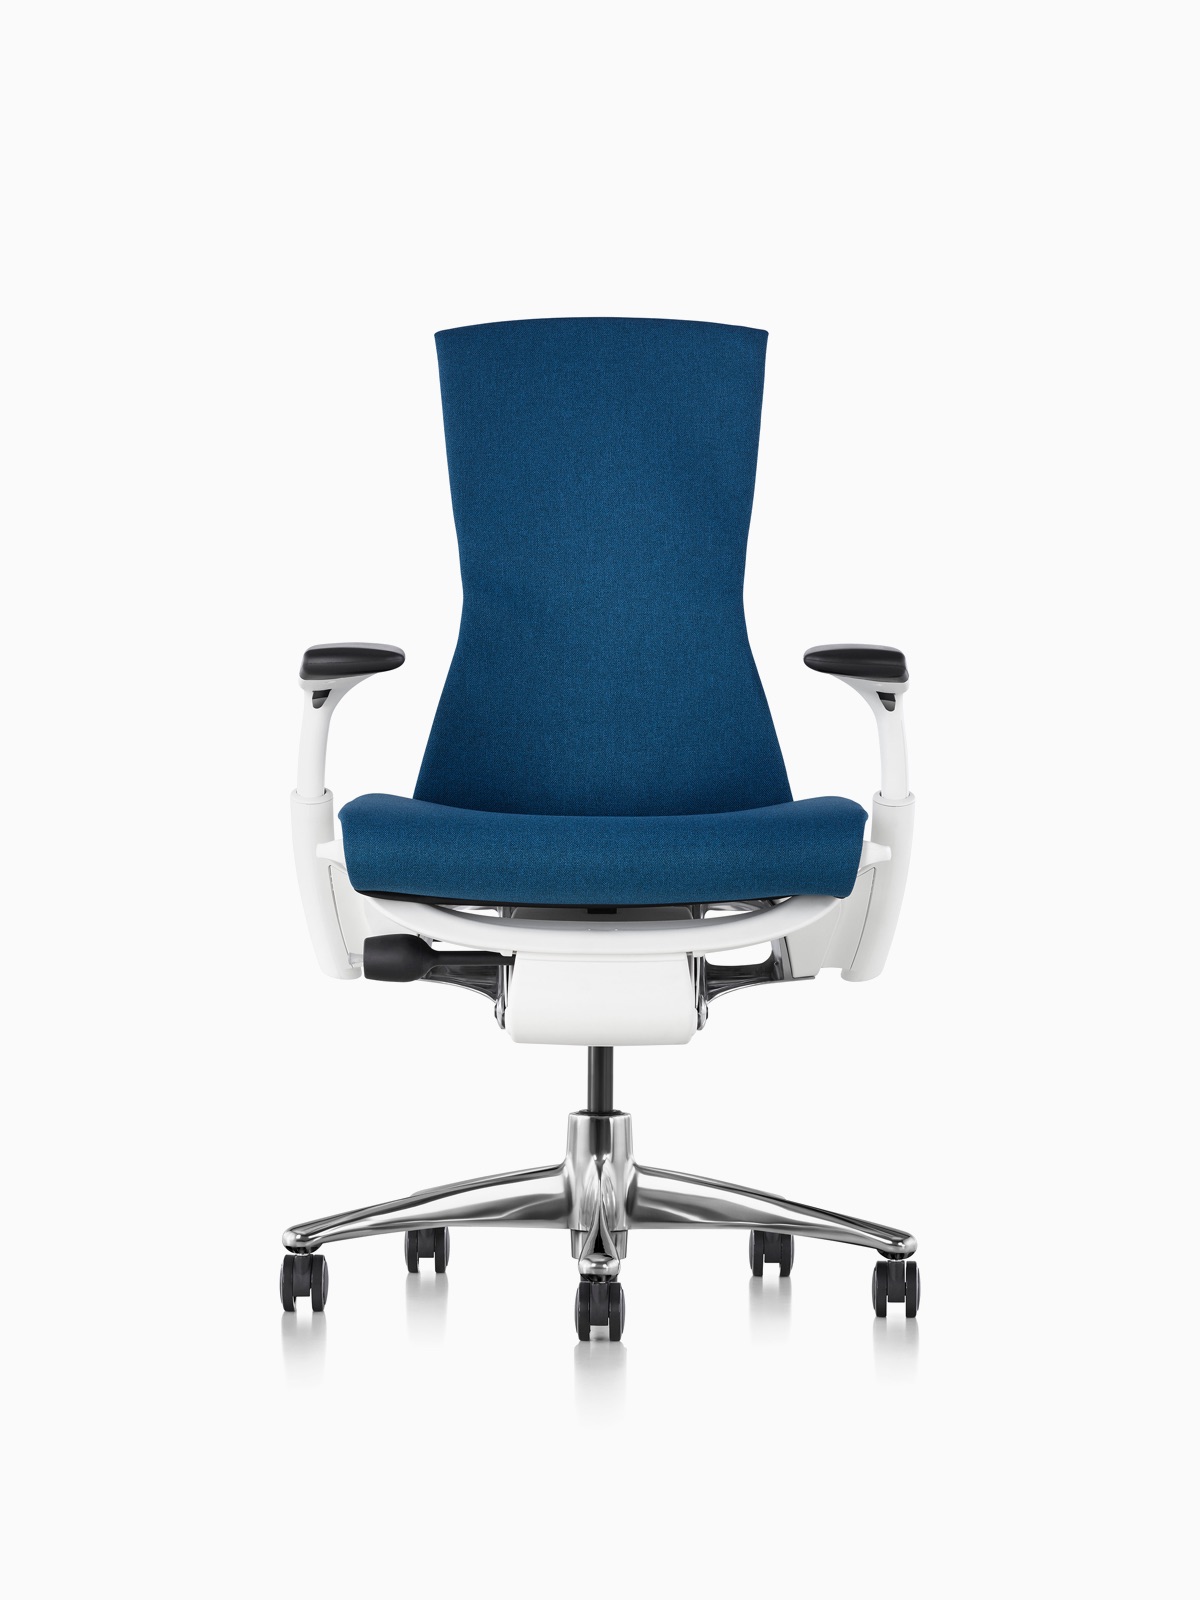 Blue Embody office chair. 